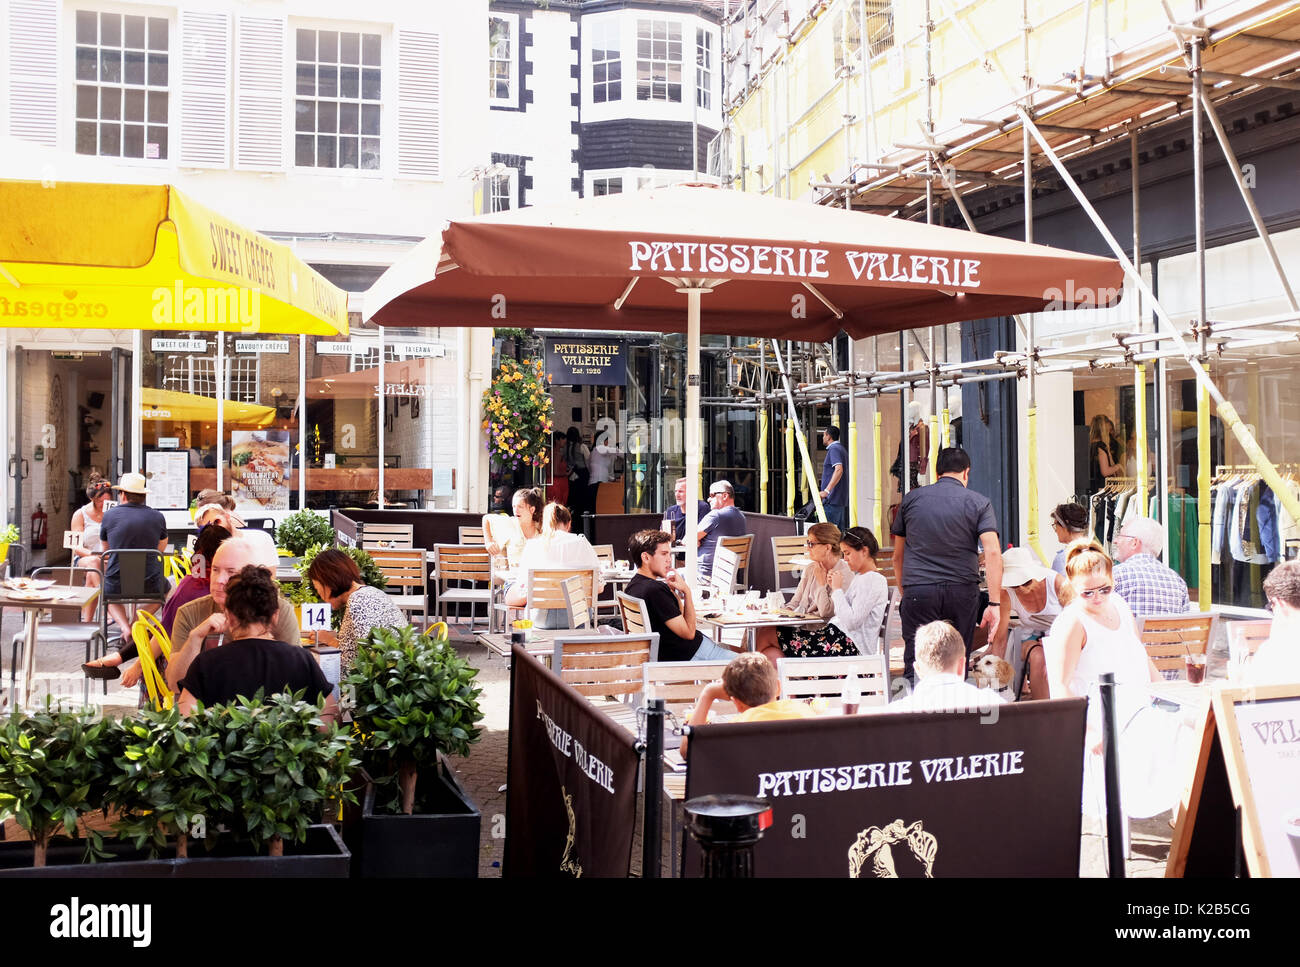 Brighton summer views in August 2017 - Patisserie Valerie coffee shop and cafe with people eating and drinking outside in The Lanes district Stock Photo